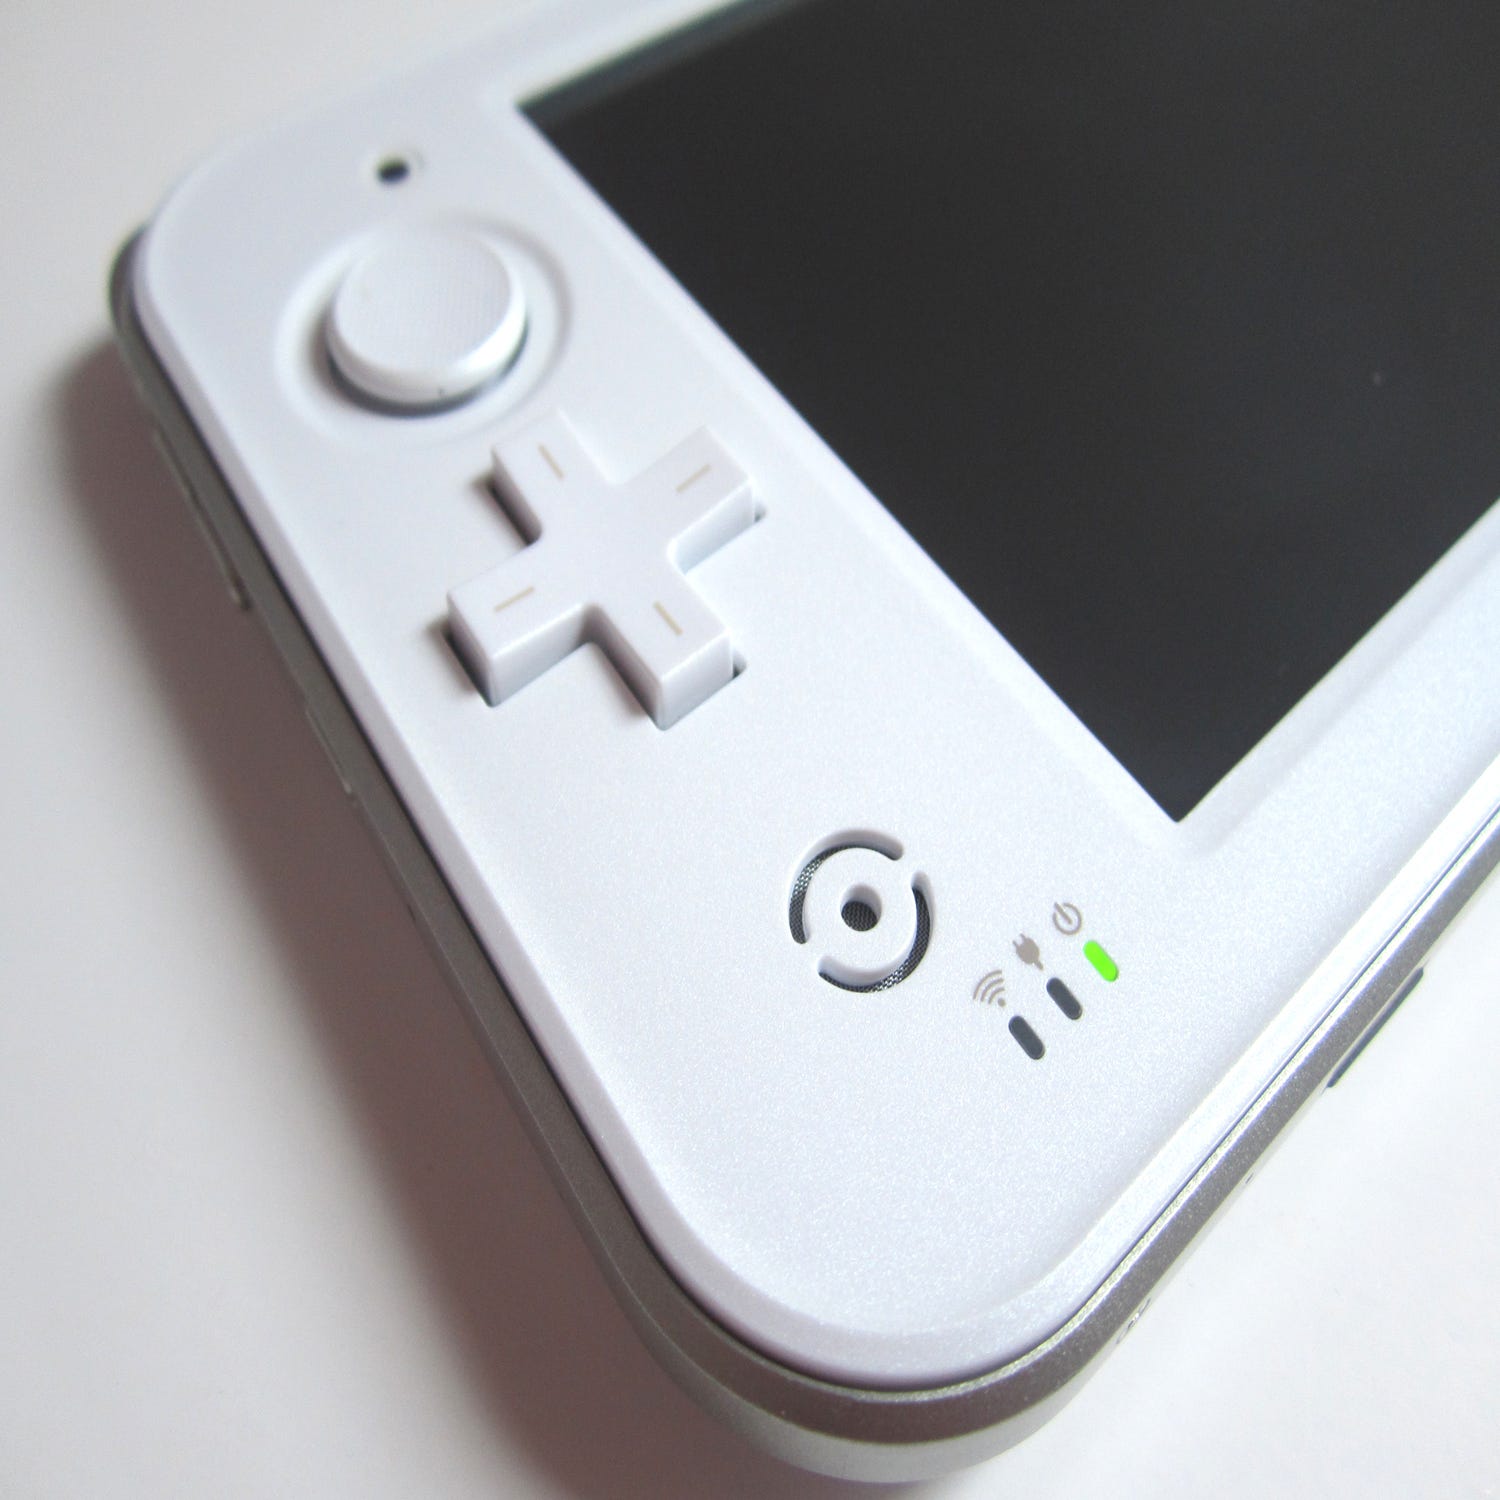 Wii U GamePad Android knock-off review